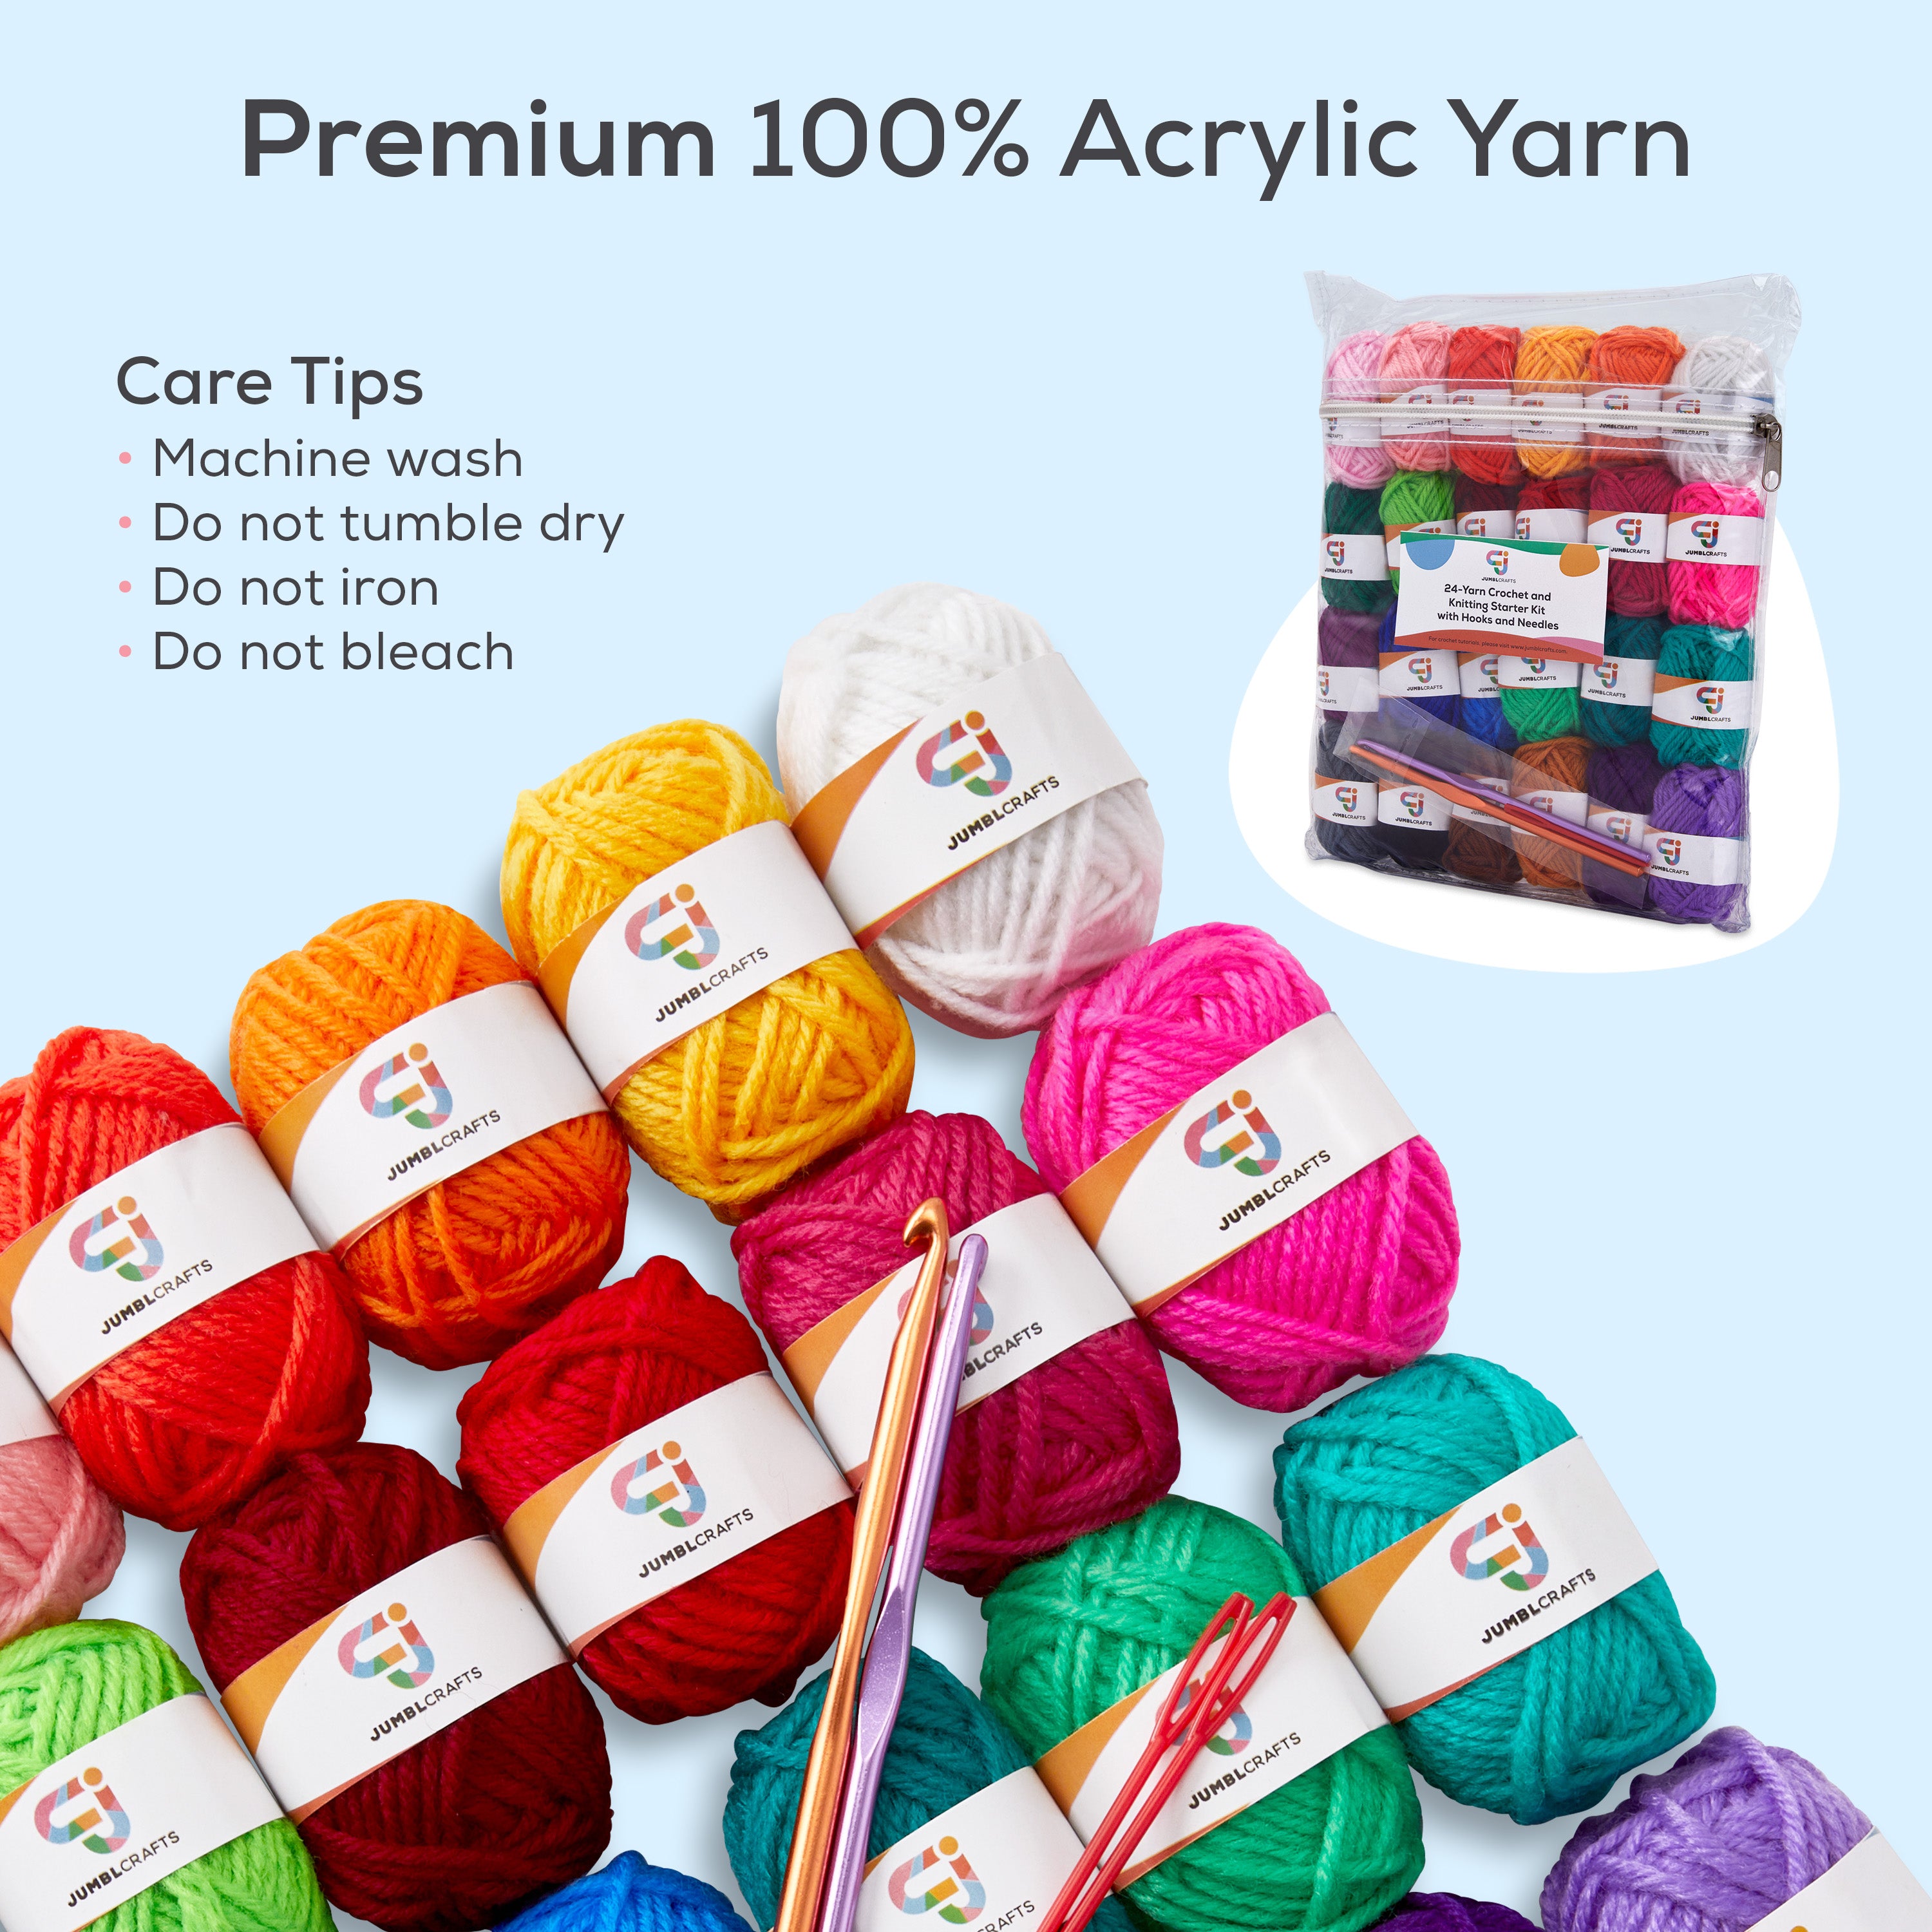 24-Yarn Crochet and Knitting Starter Kit with 2 Crochet Hooks and 2 We –  JumblCrafts